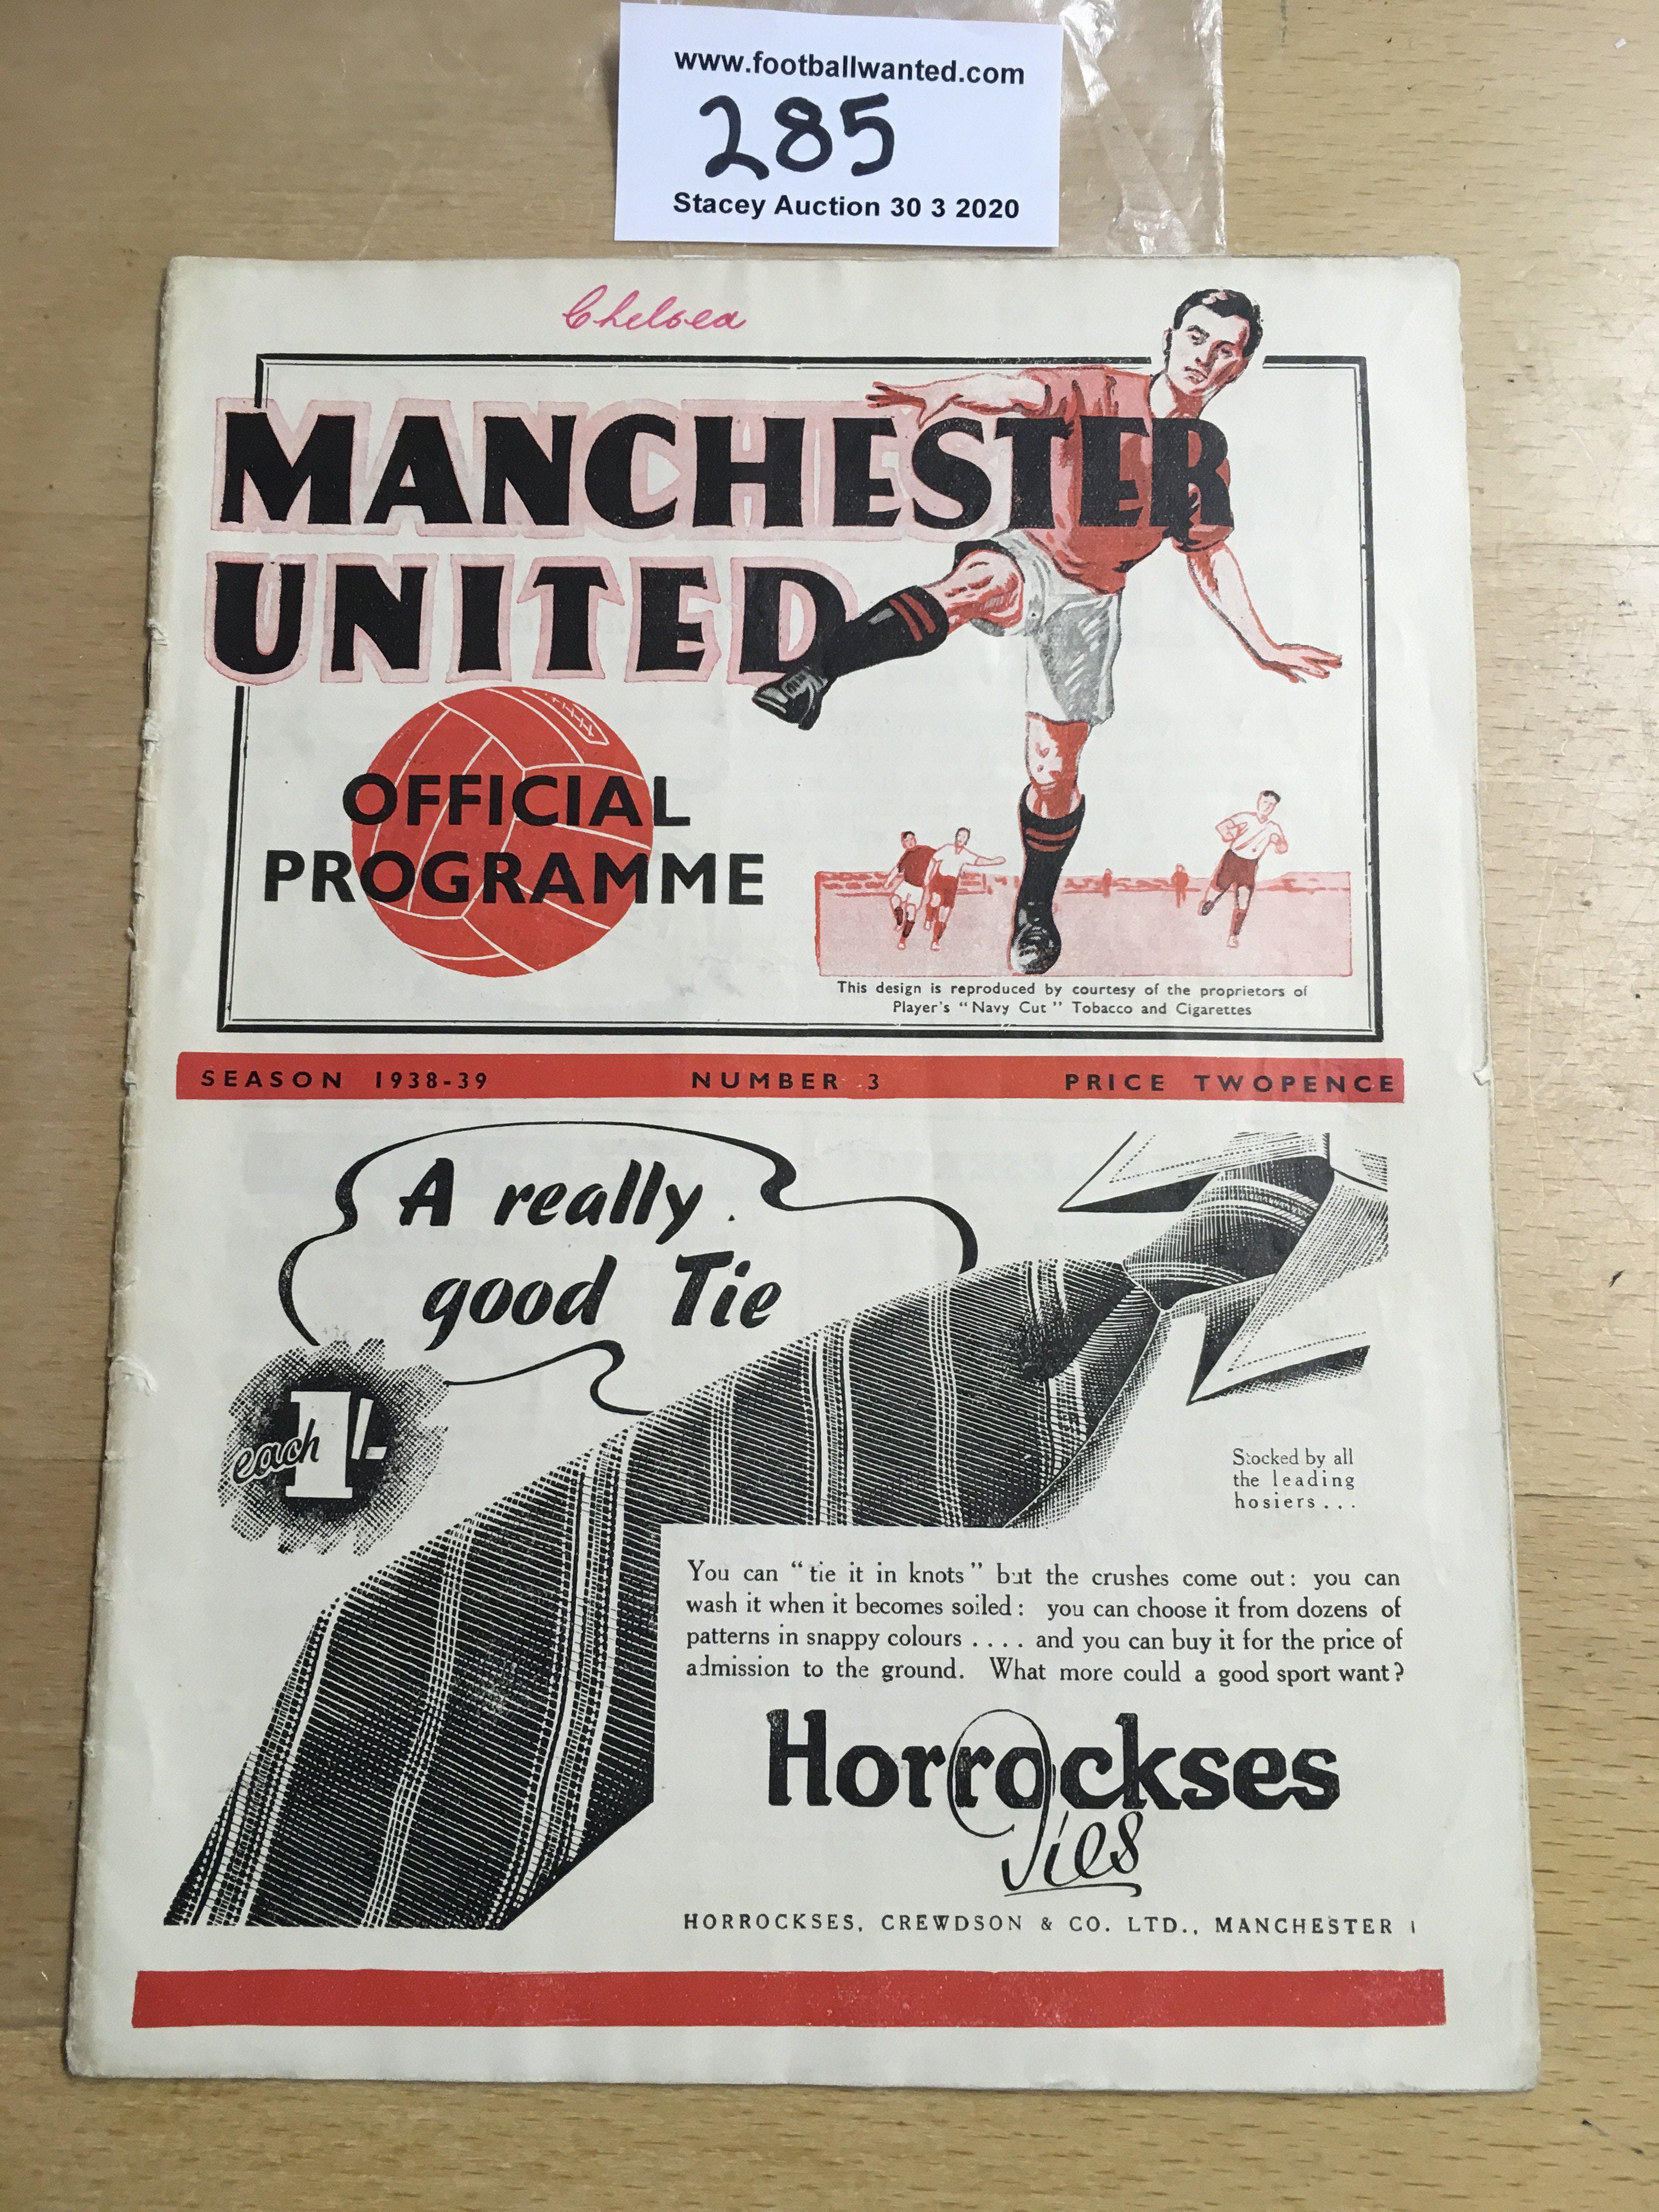 38/39 Manchester United v Chelsea Football Programme: Dated 24 9 1938 in good condition with no team